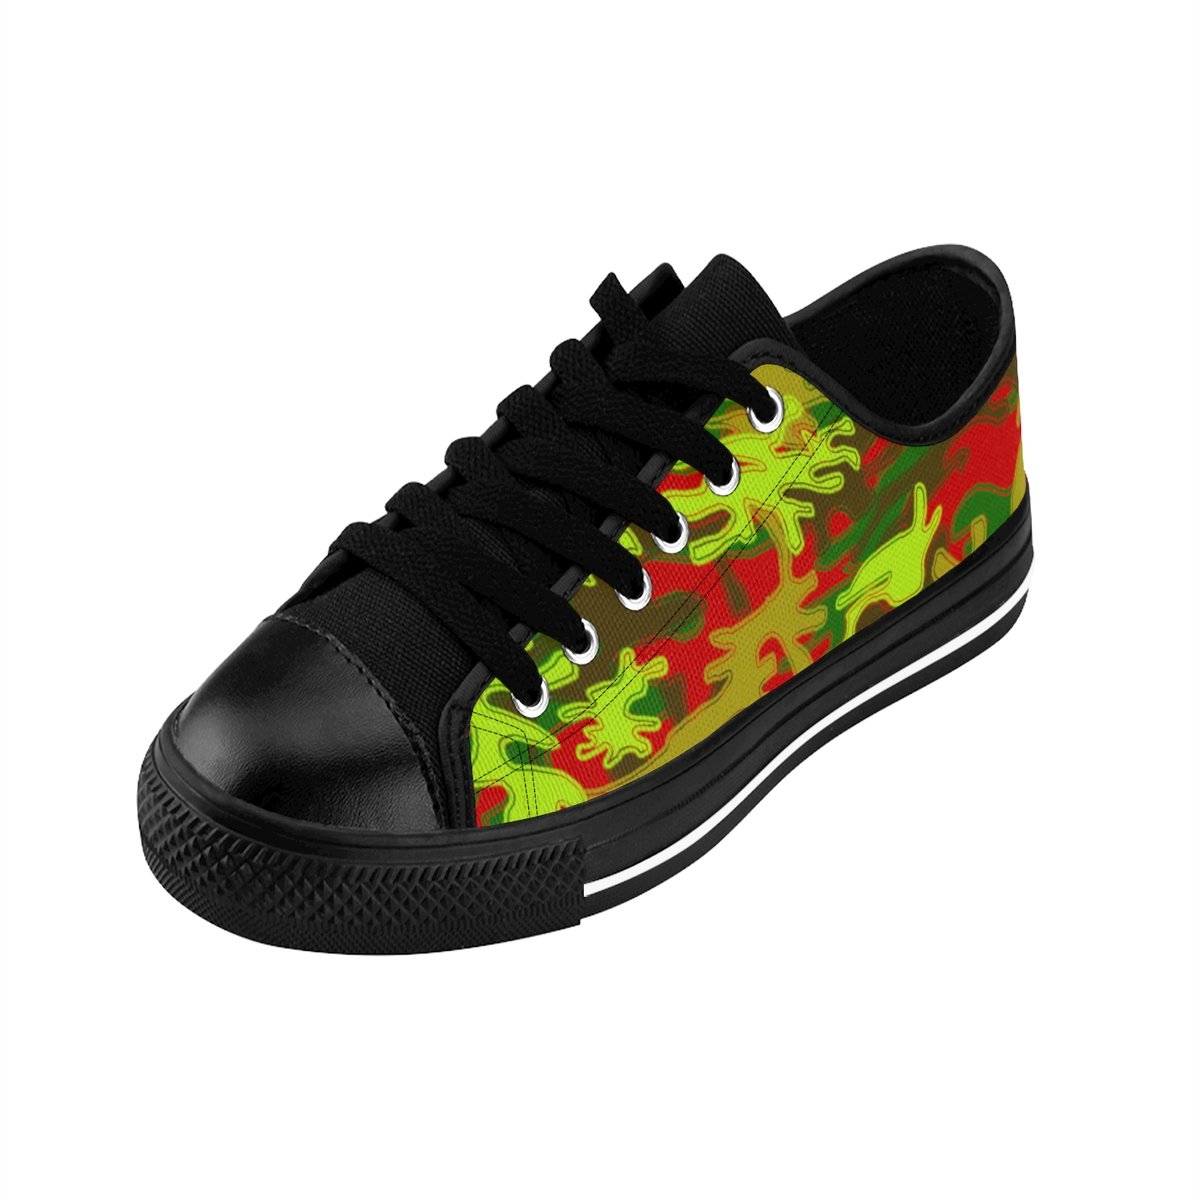 Red Green Camo Men's Sneakers, Red Green Camouflage Military Print ...